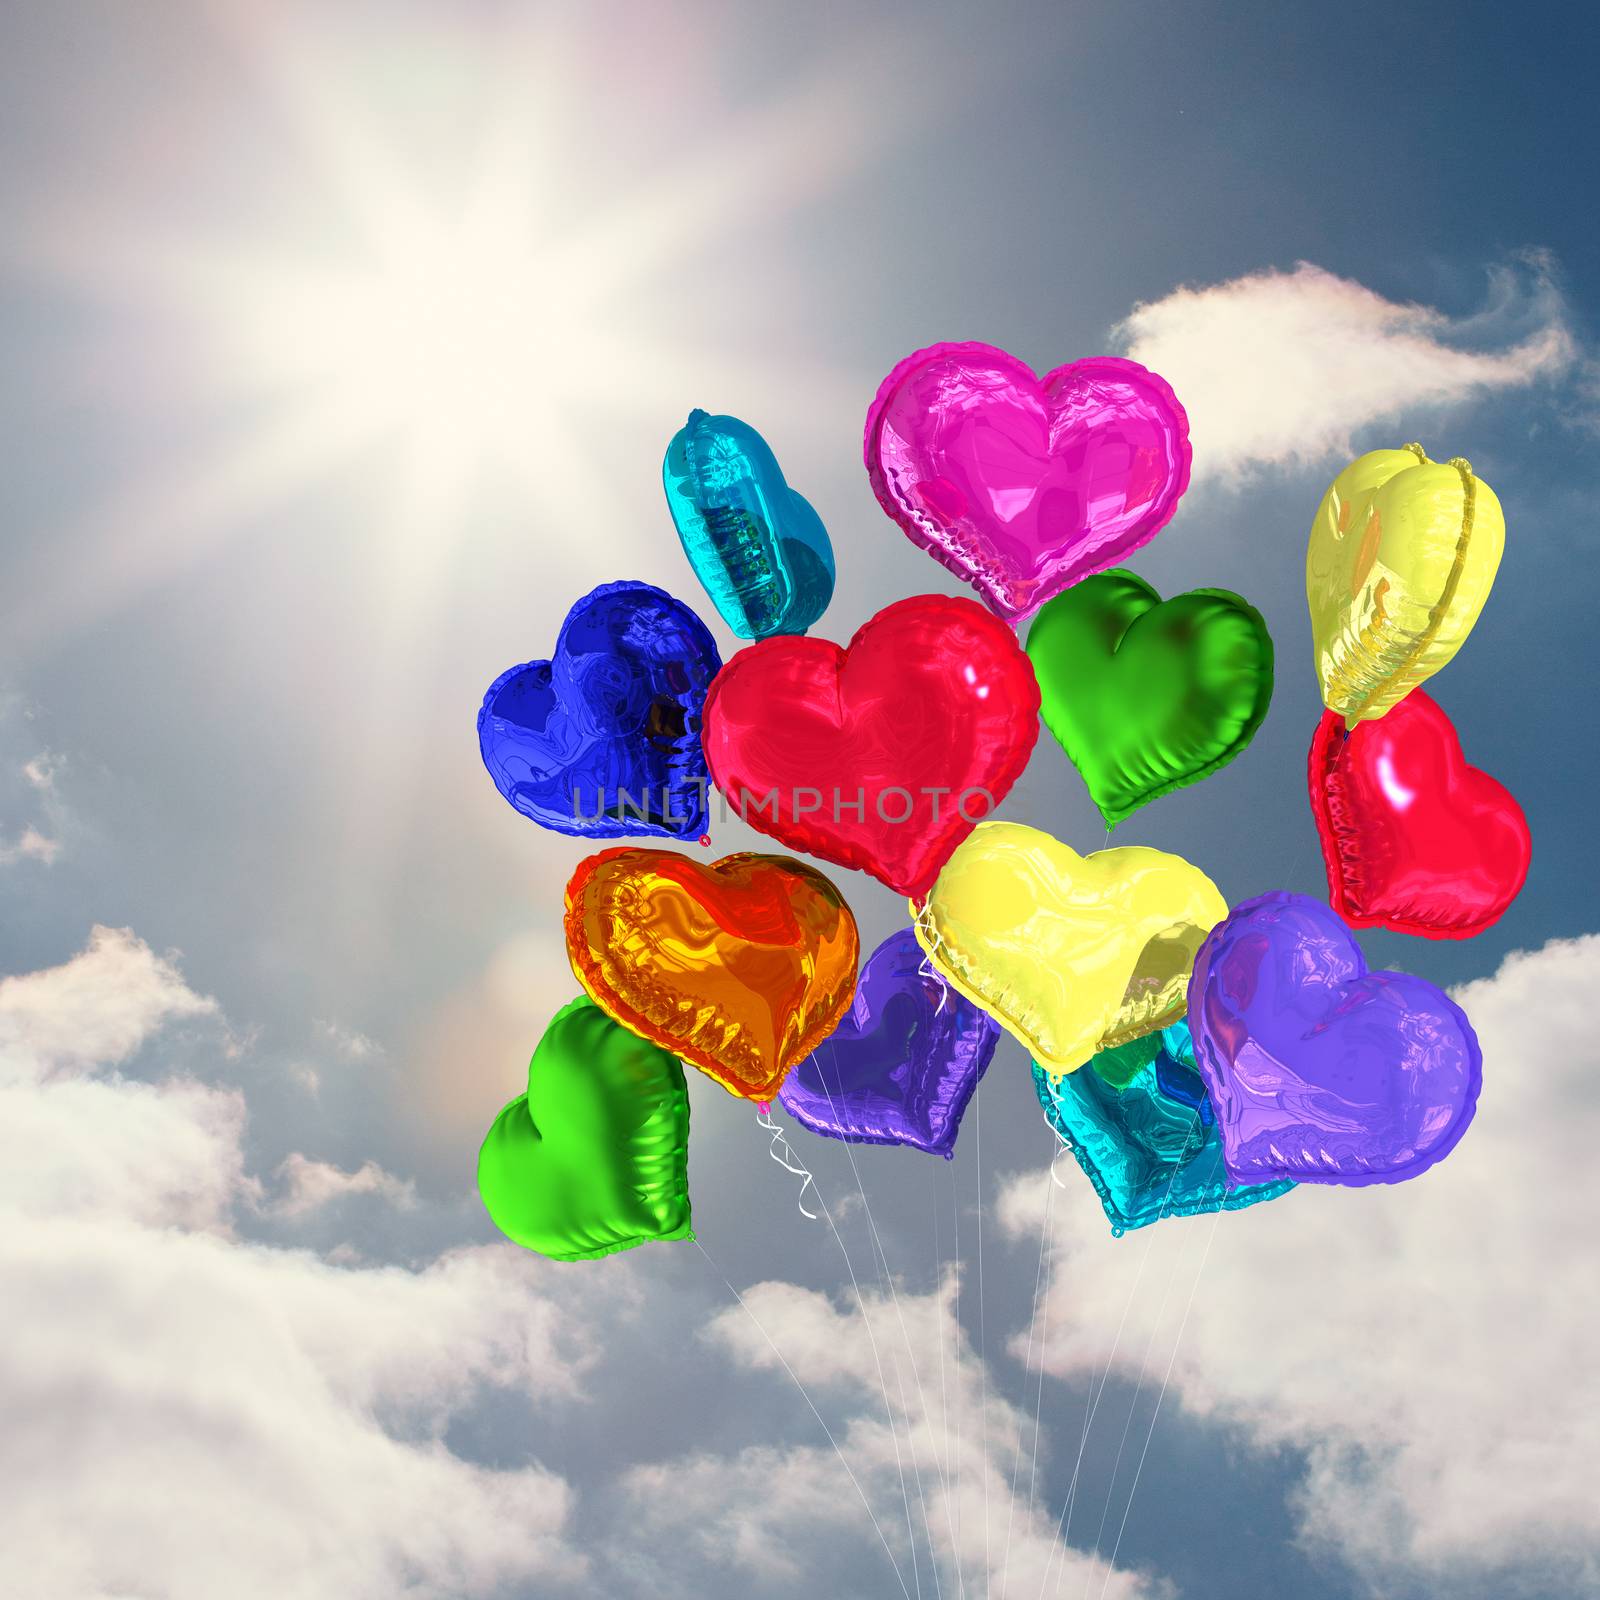 Composite image of heart balloons by Wavebreakmedia